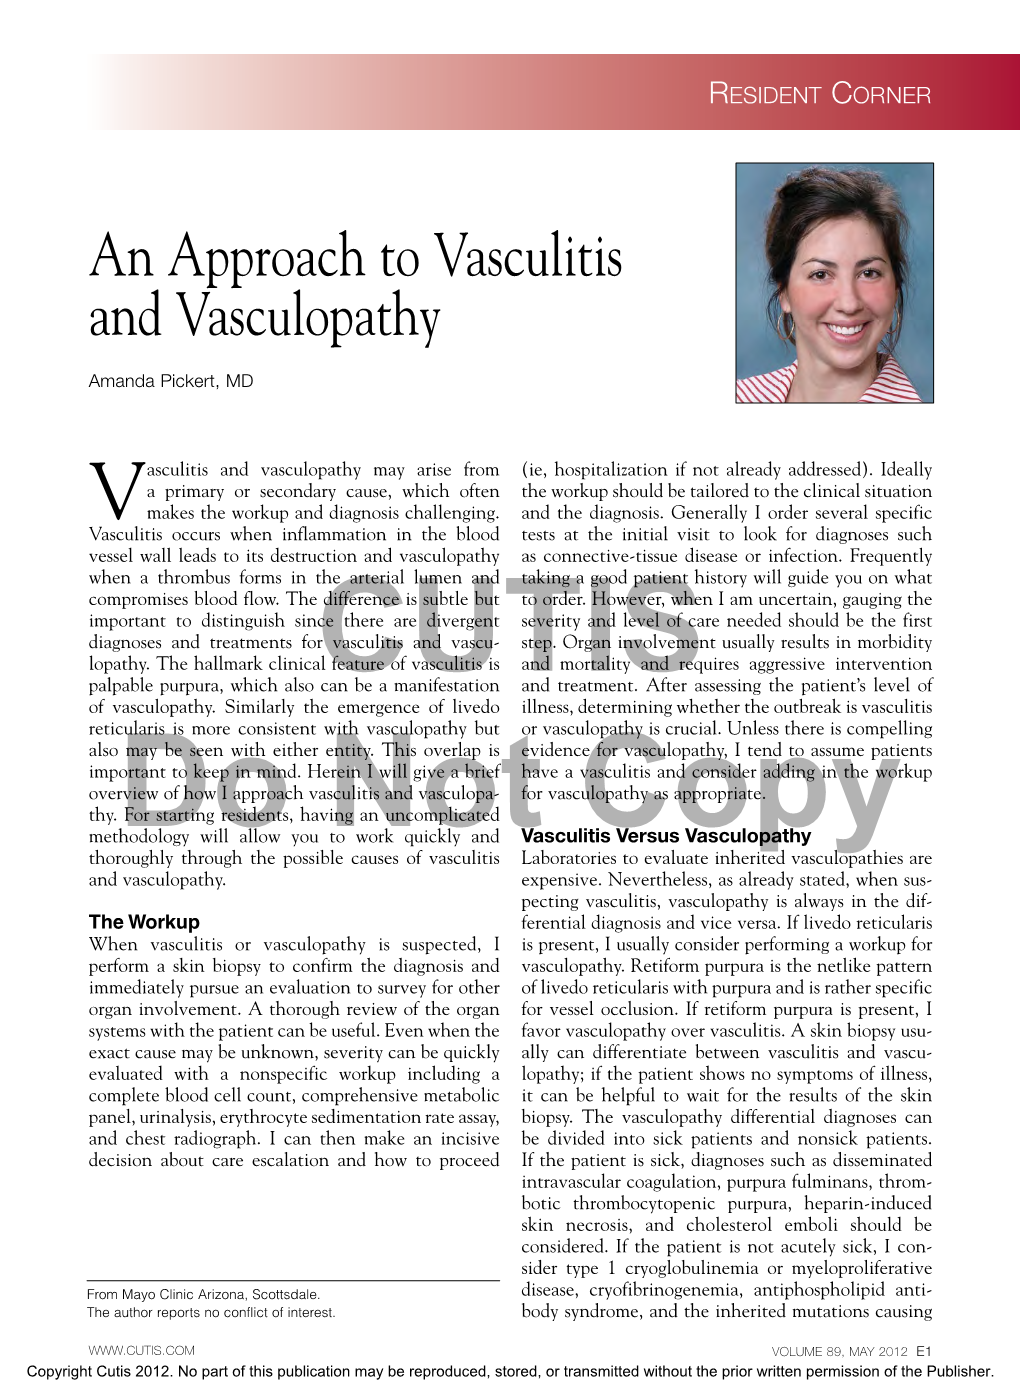 An Approach to Vasculitis and Vasculopathy